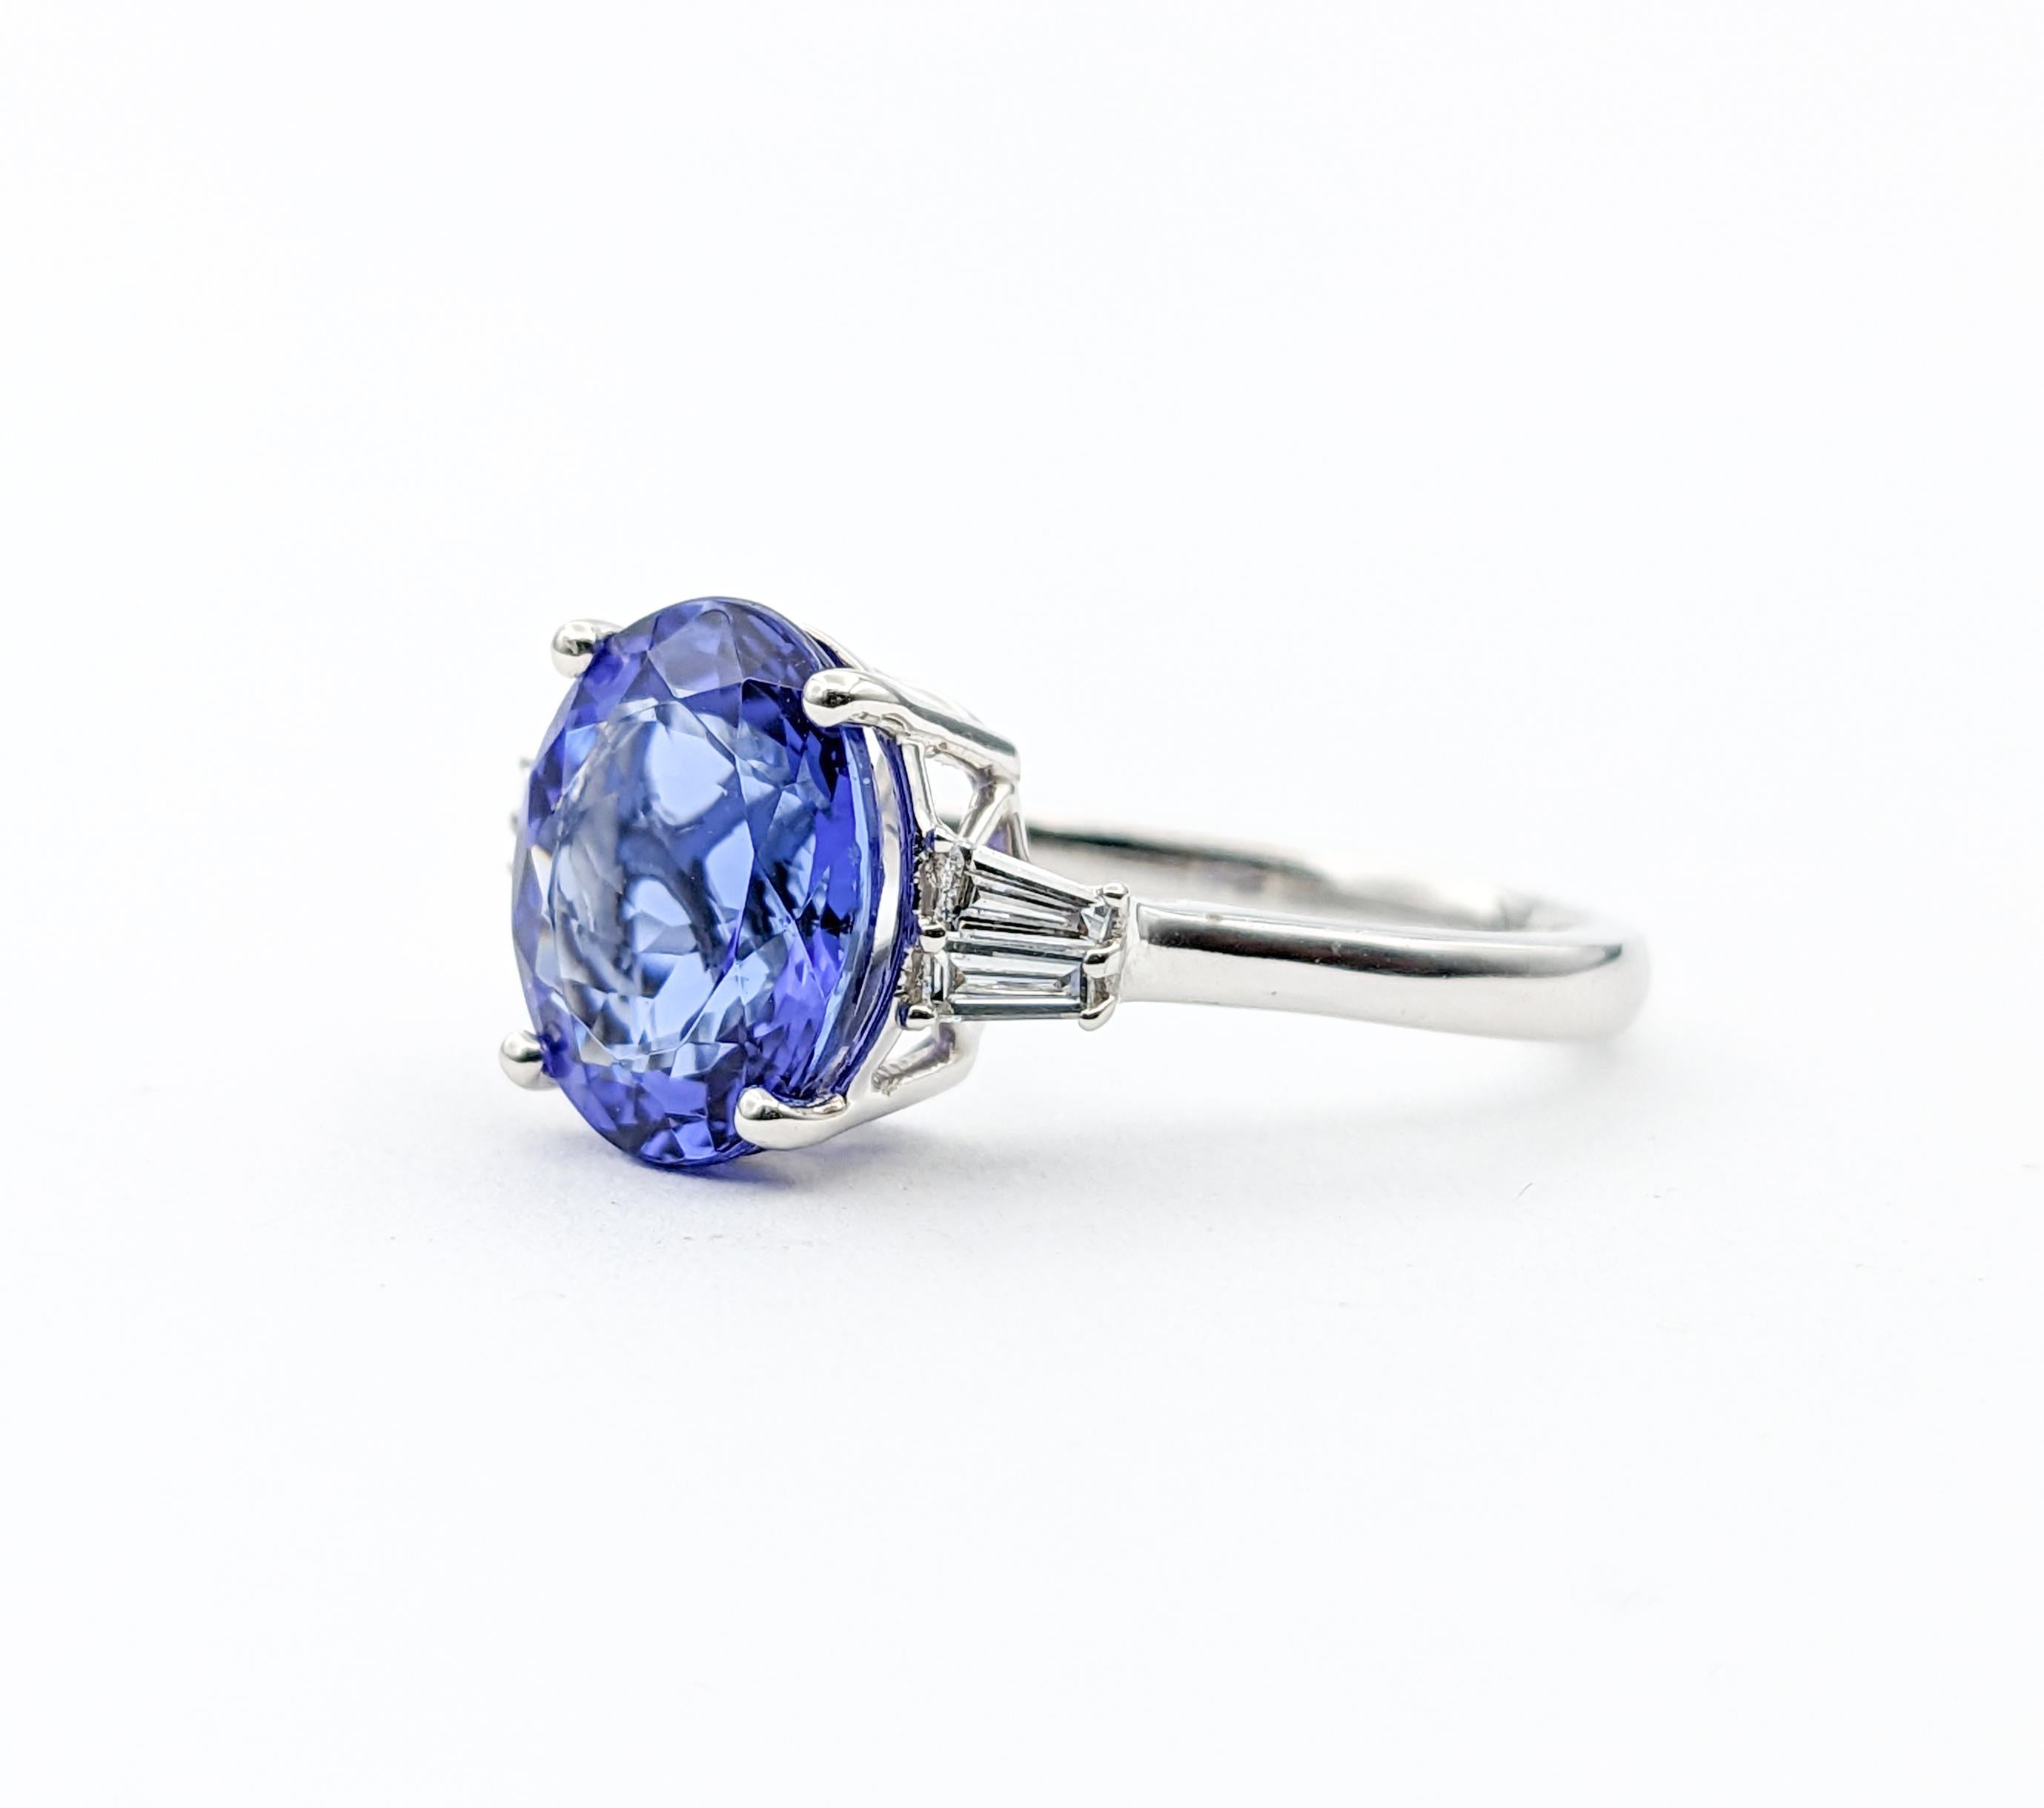 3ct Blue Tanzanite & Diamond Ring In 950pt platinum

Introducing this beautiful Tanzanite ring, masterfully crafted in 950 platinum. This ring boasts a breathtaking 3.00ct Natural Oval Tanzanite, adding a touch of vibrant blue-violet color. The